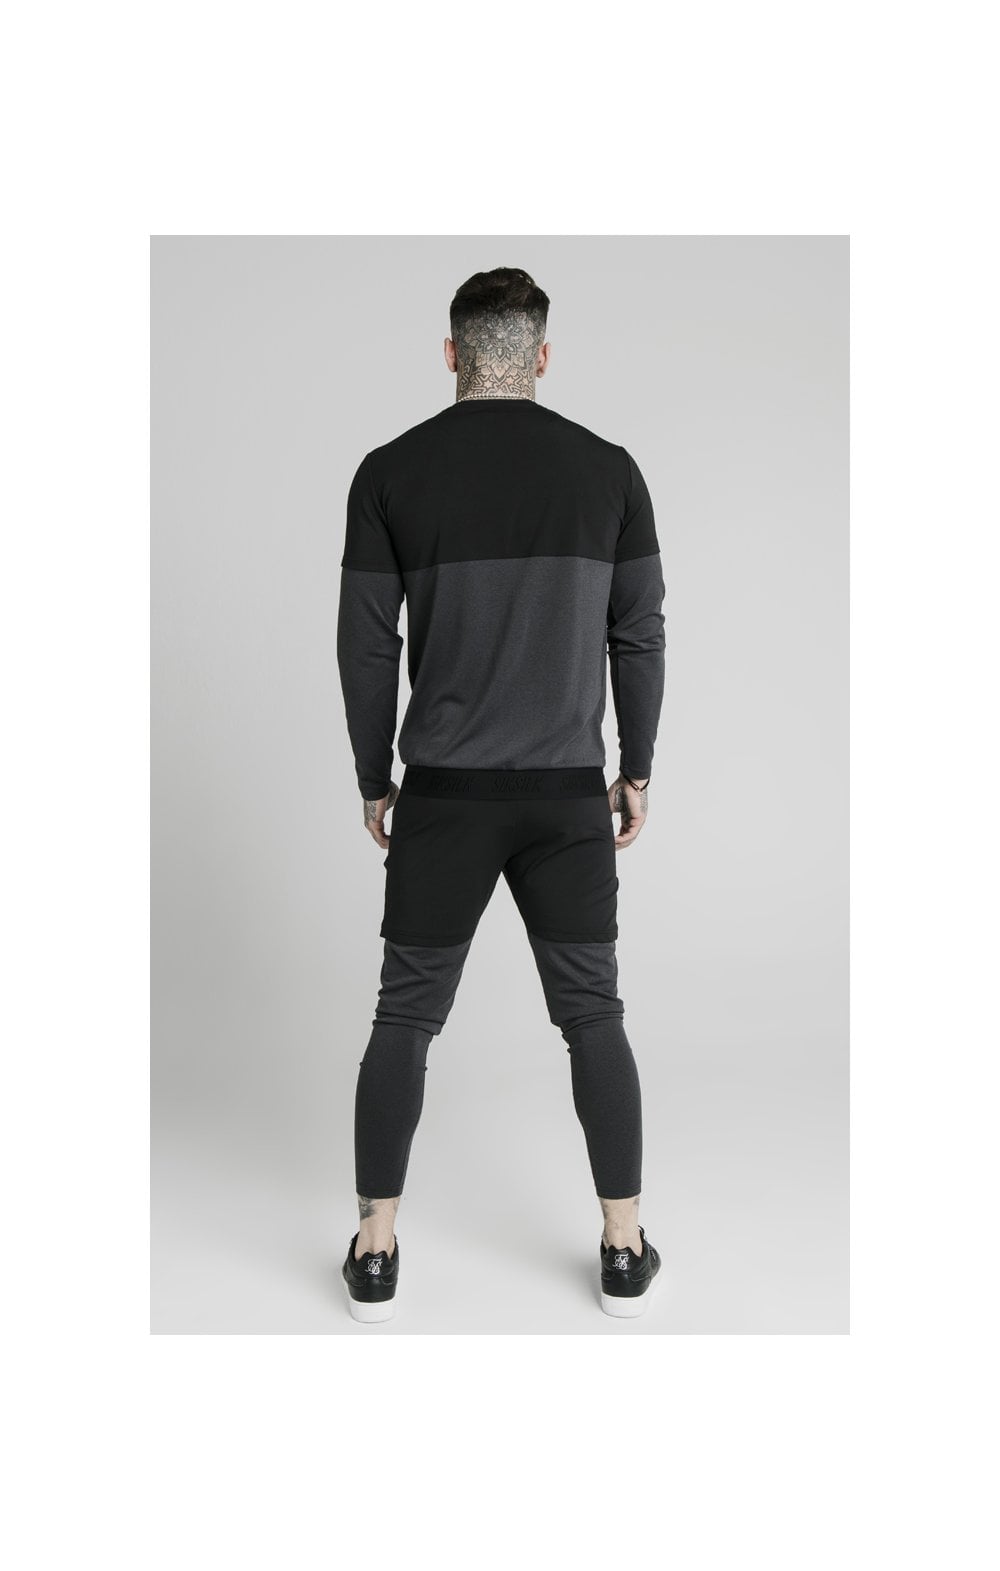 Load image into Gallery viewer, SikSilk Advanced Tech Sweater - Black (4)